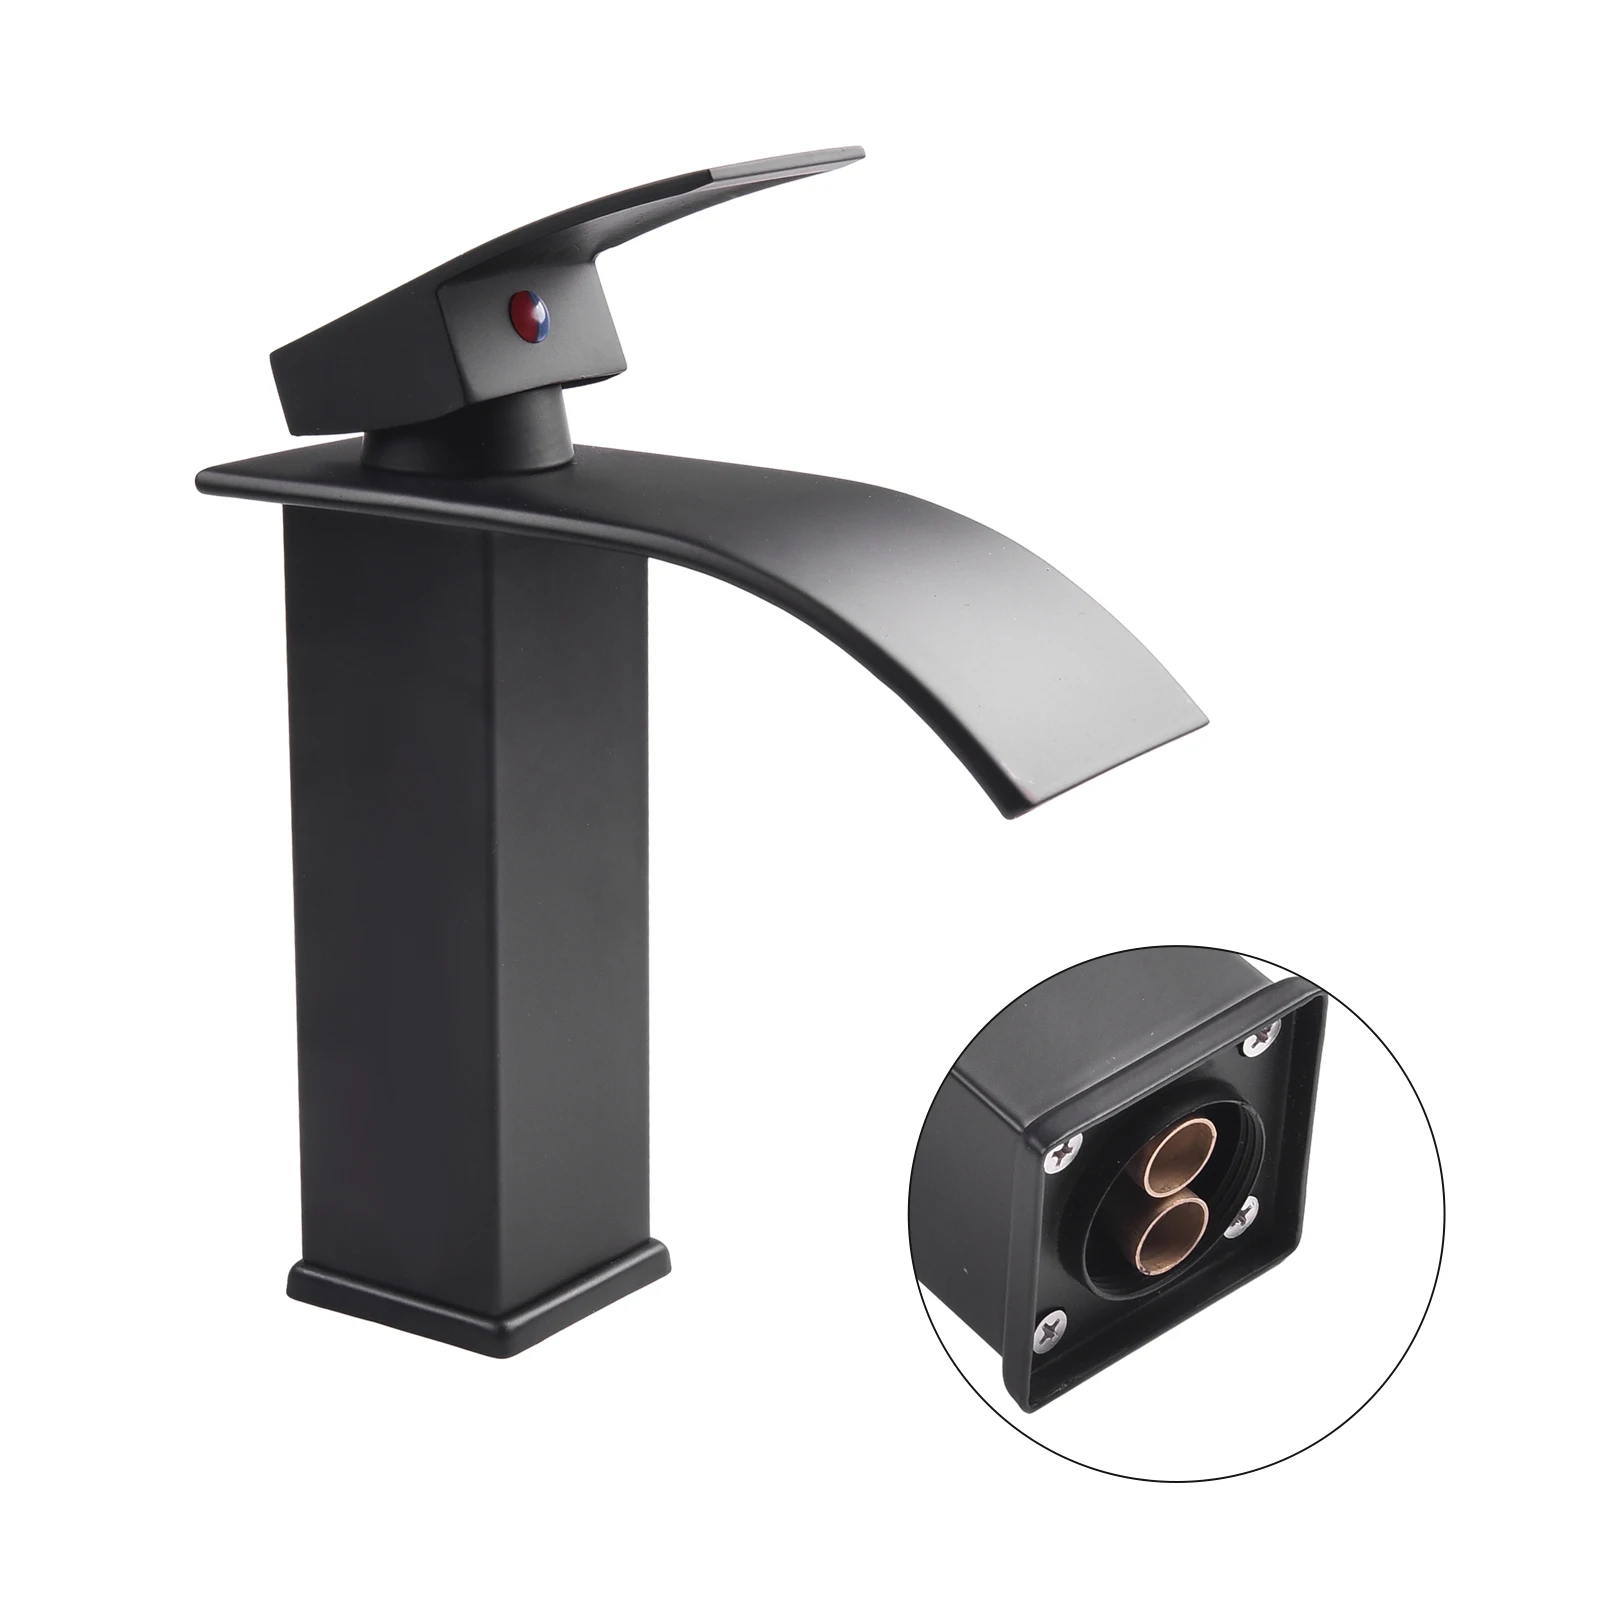 

Waterfall Basin Sink Faucet Black Faucets Brass Bath Faucets Hot&Cold Water Mixer Vanity Tap Deck Mounted Washbasin Taps